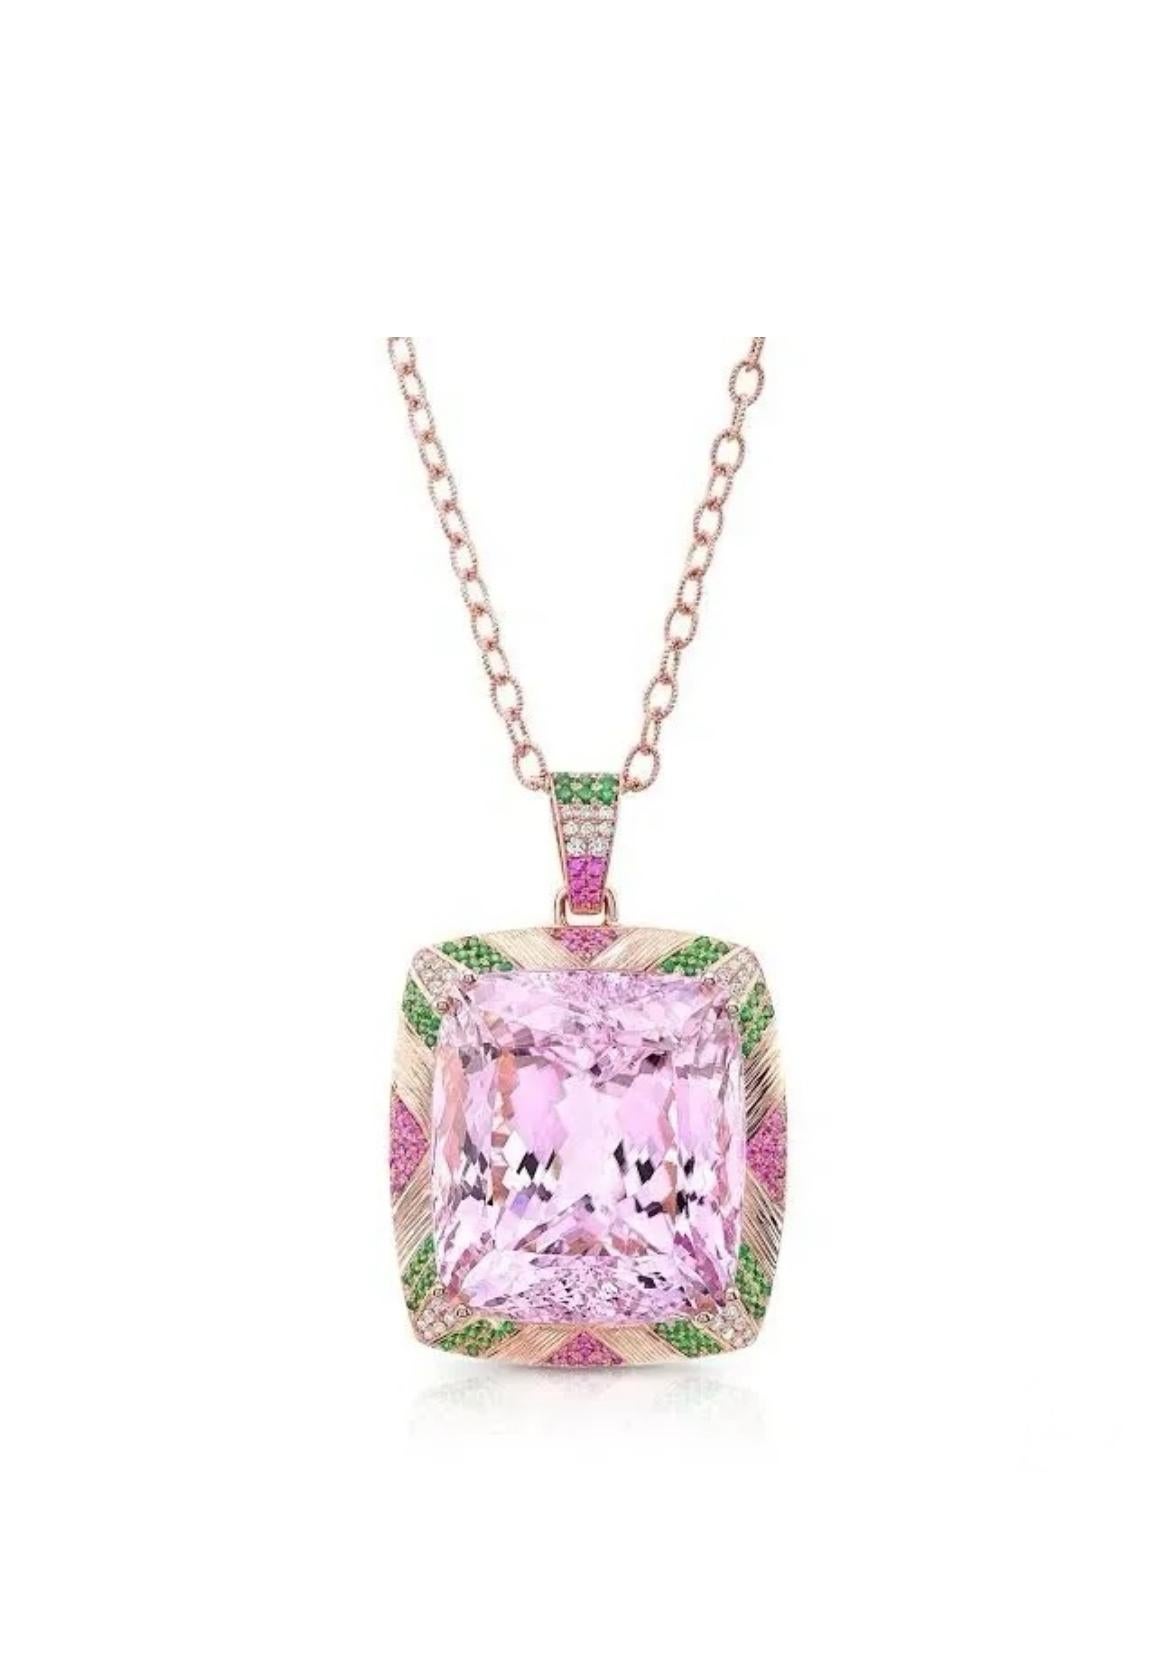 Cushion Cut 132ct cushion Pink Kunzite, Tsavorite and Pink Sapphire Necklace.  For Sale